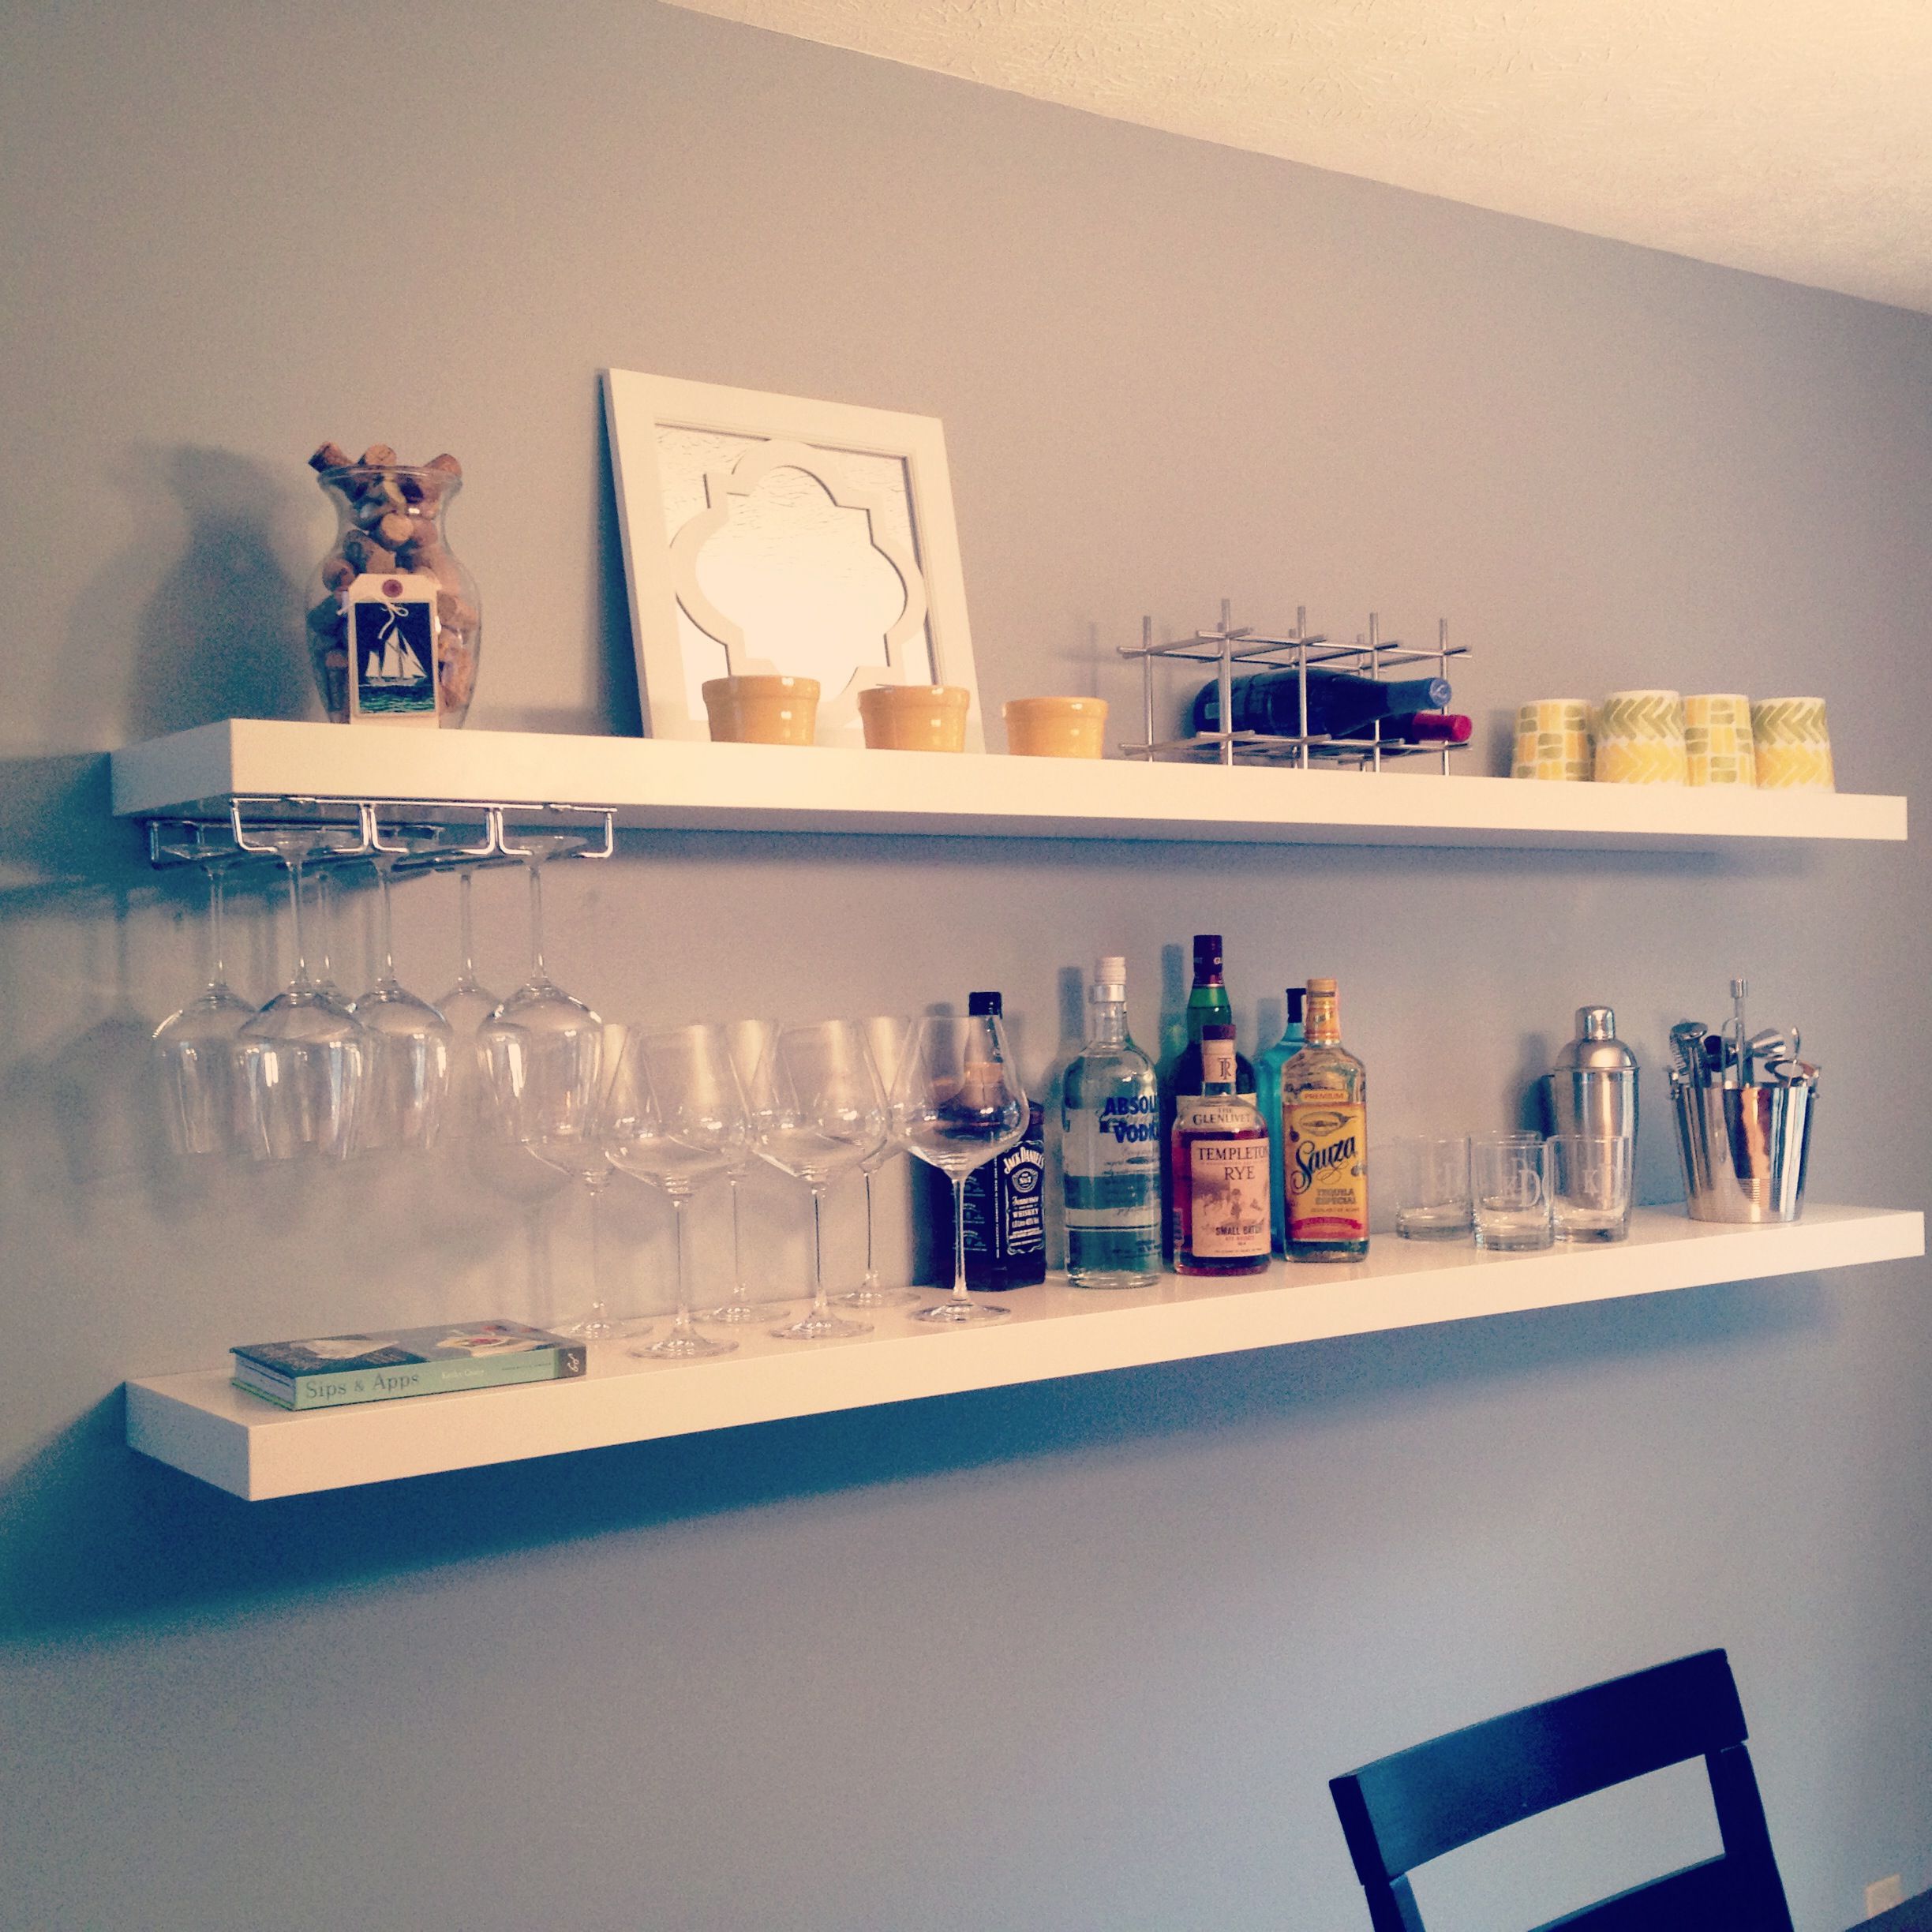 easy diy bar using ikea shelves via livingwithaboy floating for wall shoe storage mantel kits brick fireplace small kitchen island ideas with seating hanging without screws shelf